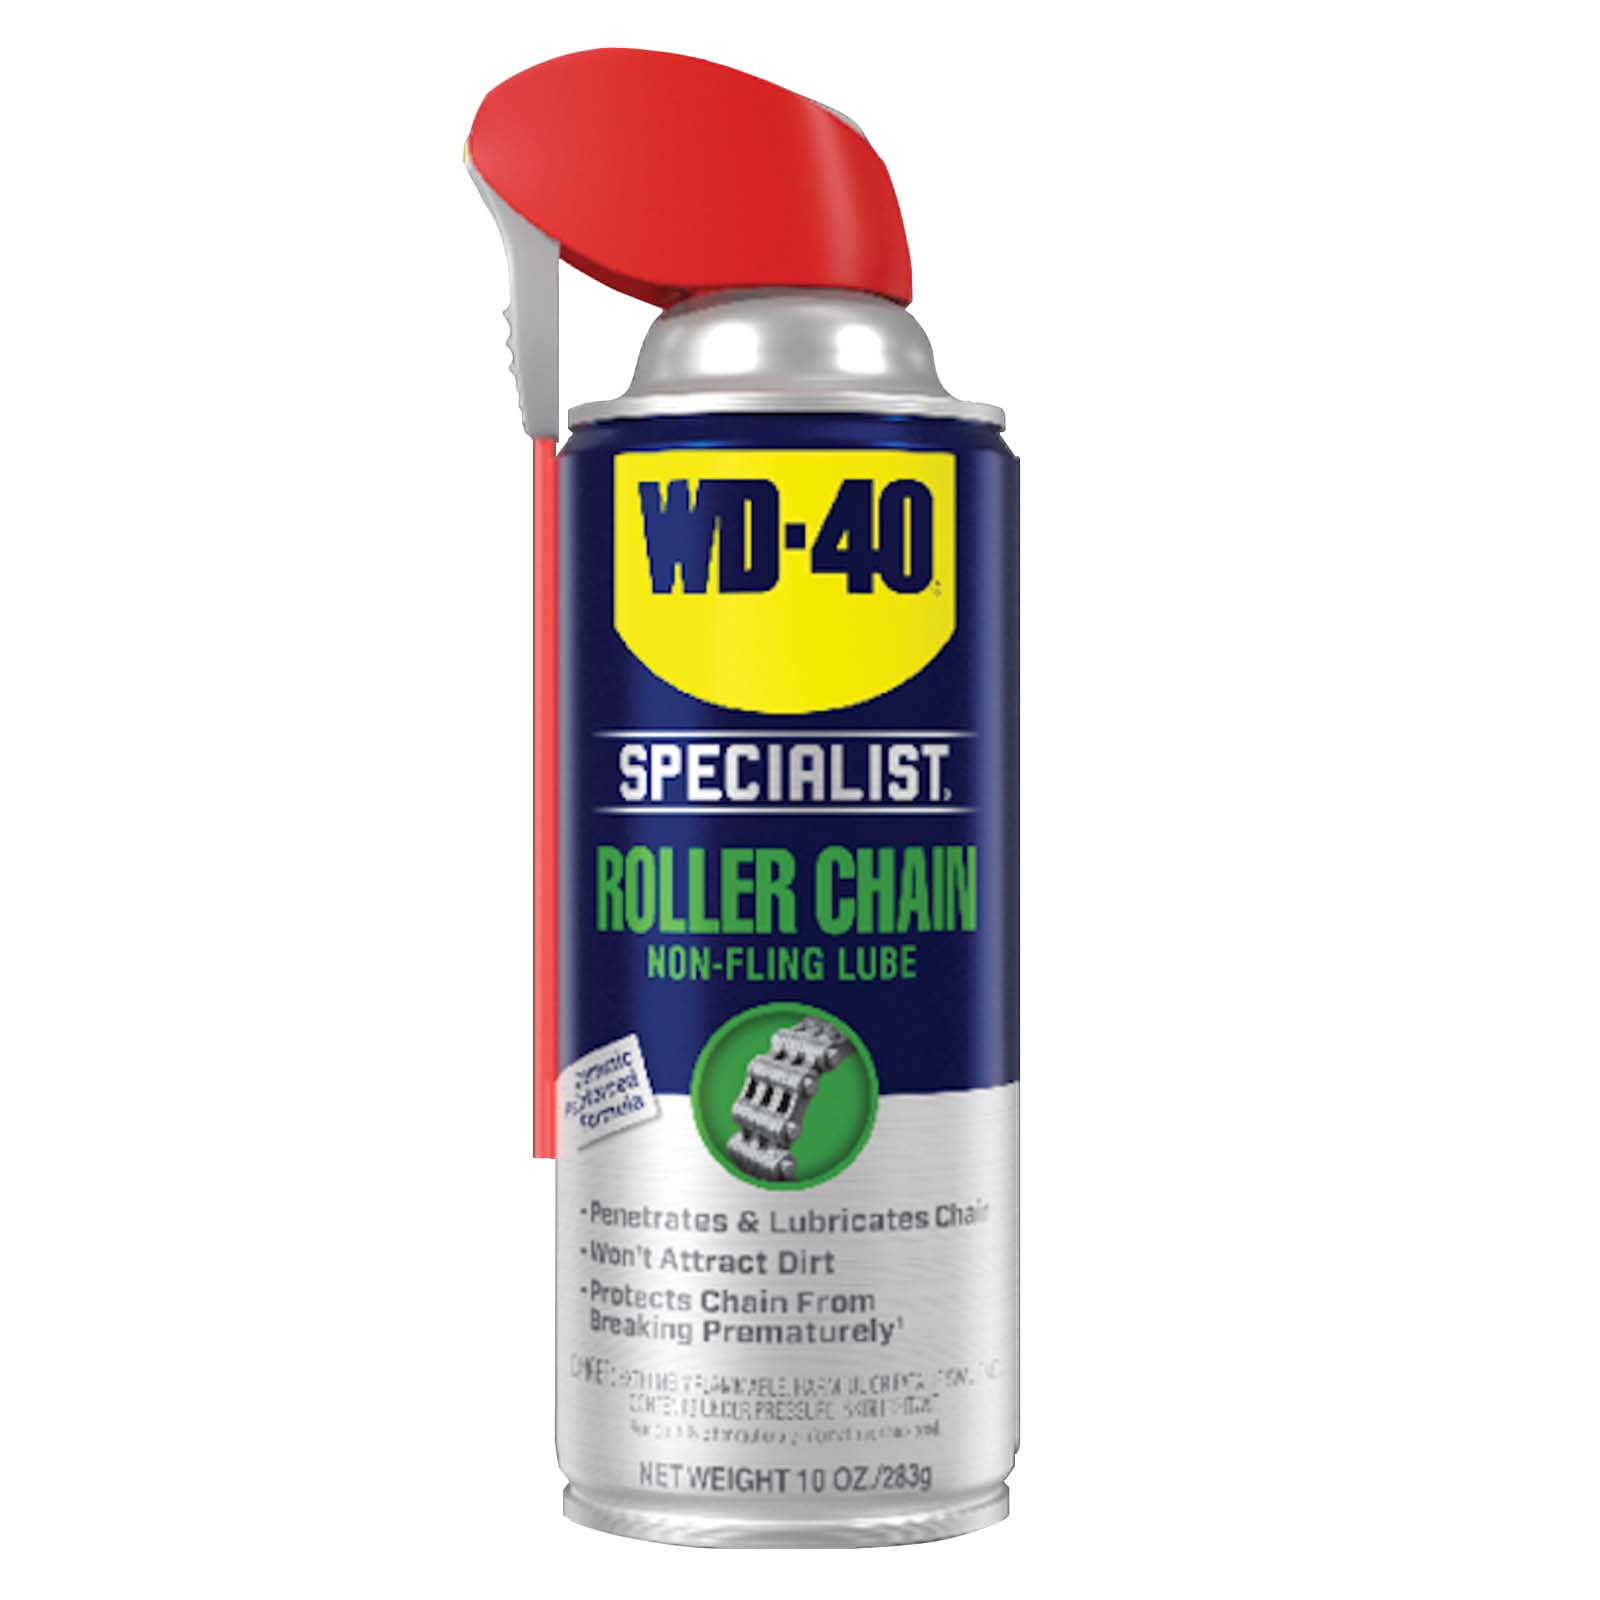 WD-40 Specialist Roller Chain Lube